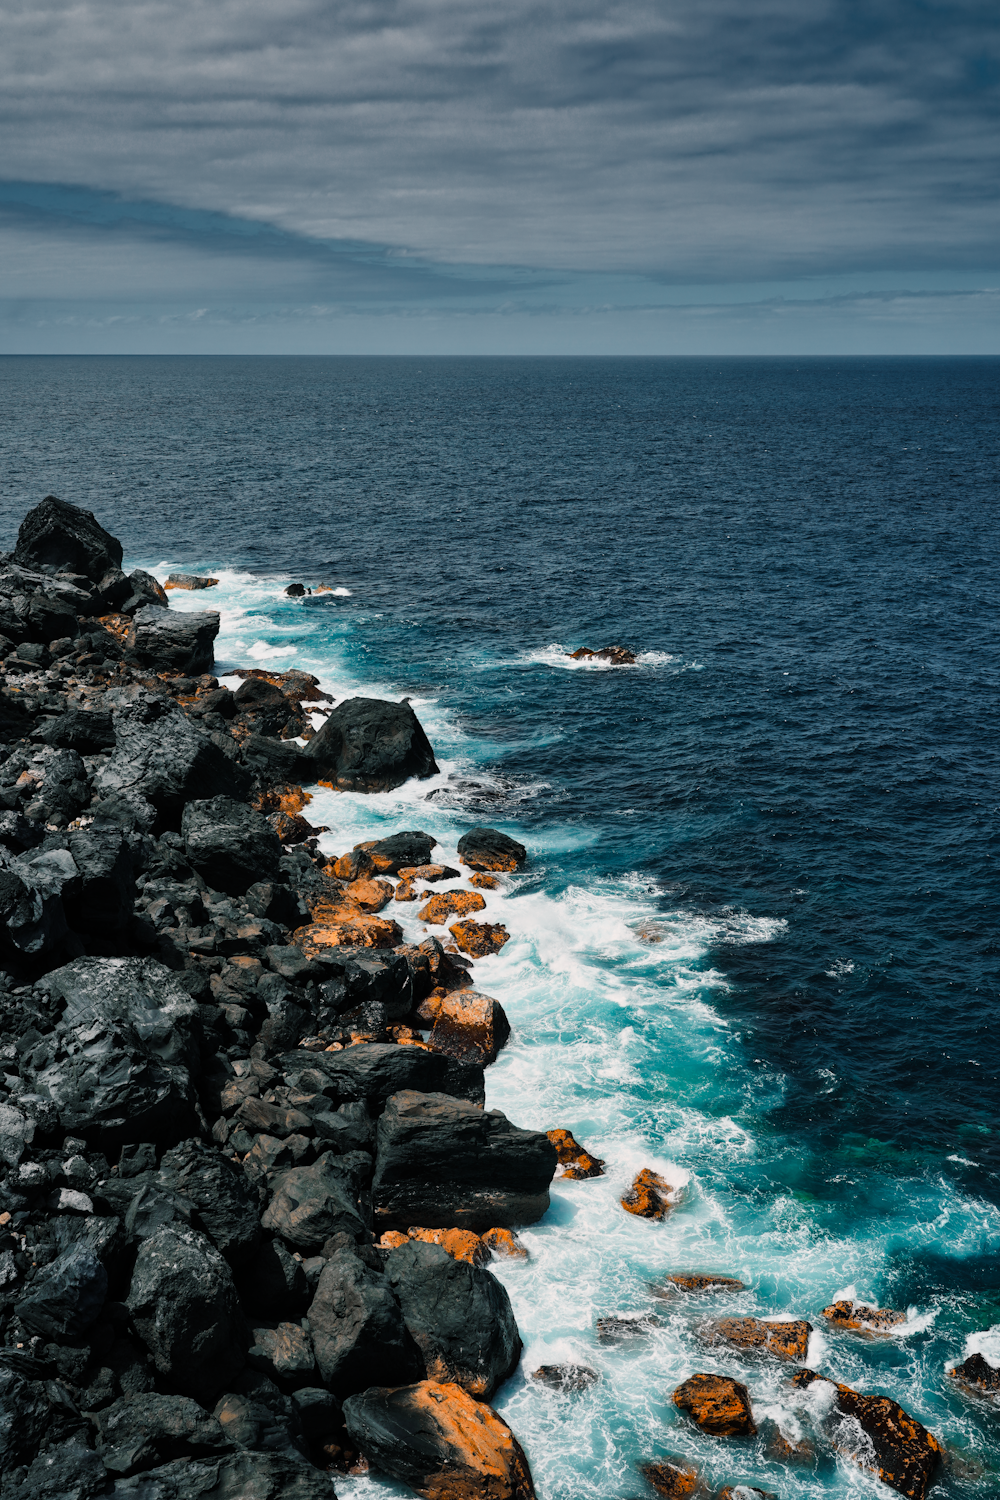 a view of the ocean from a rocky cliff